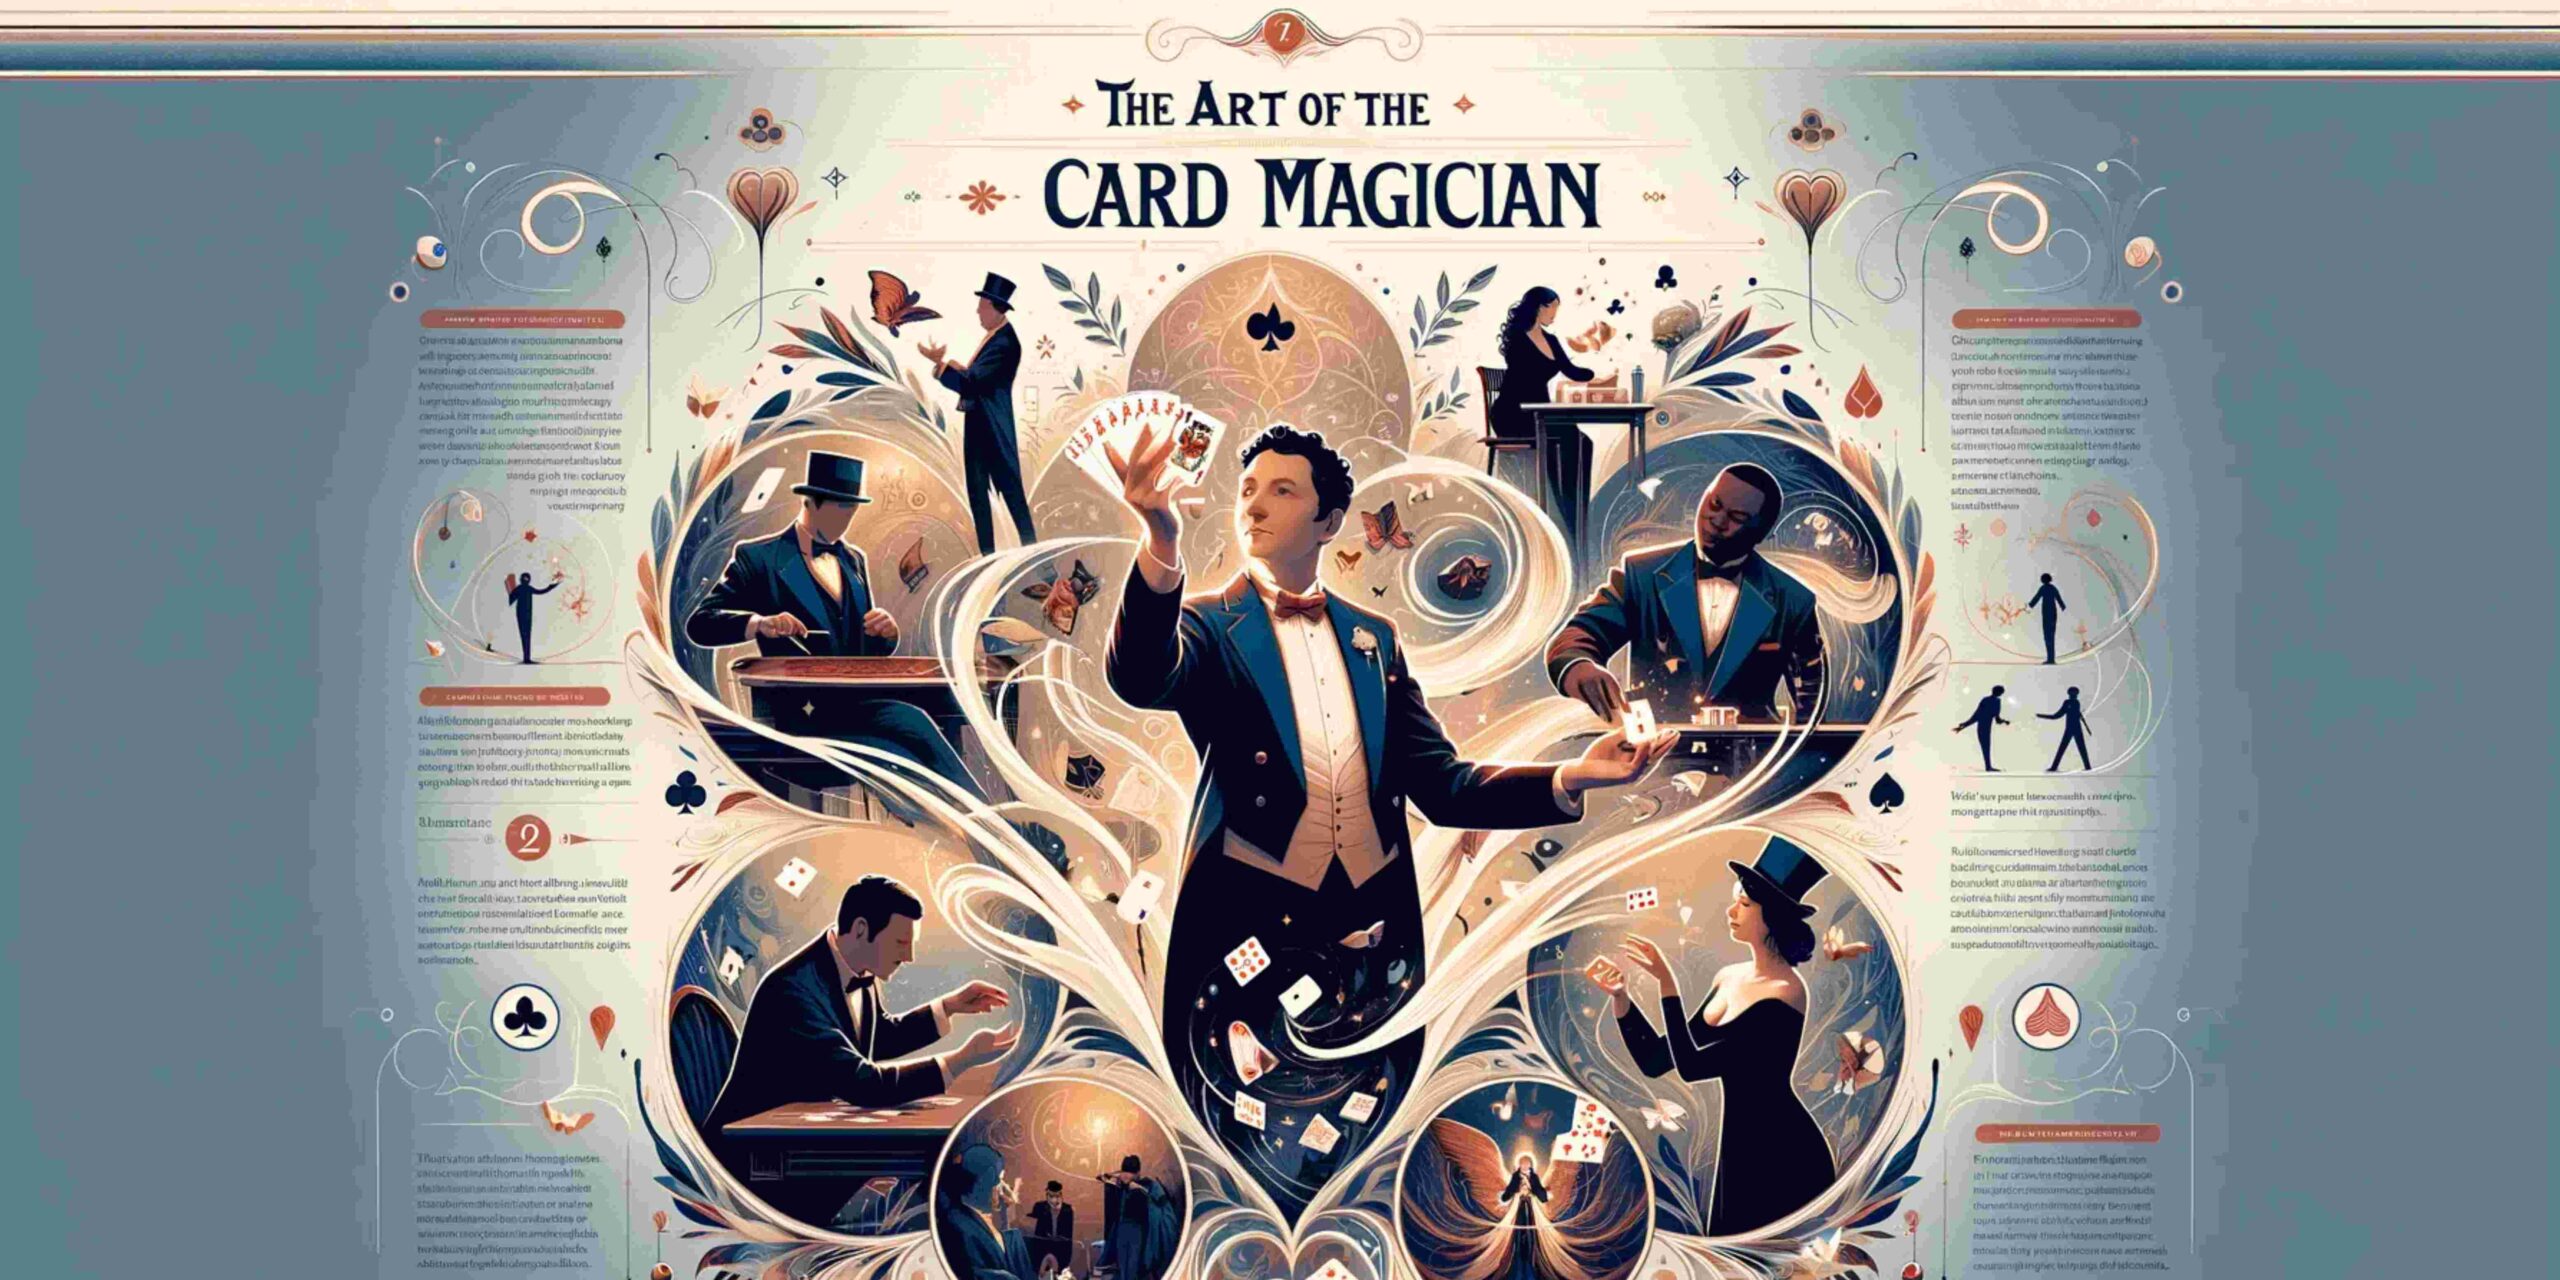 The Art of the Card Magician